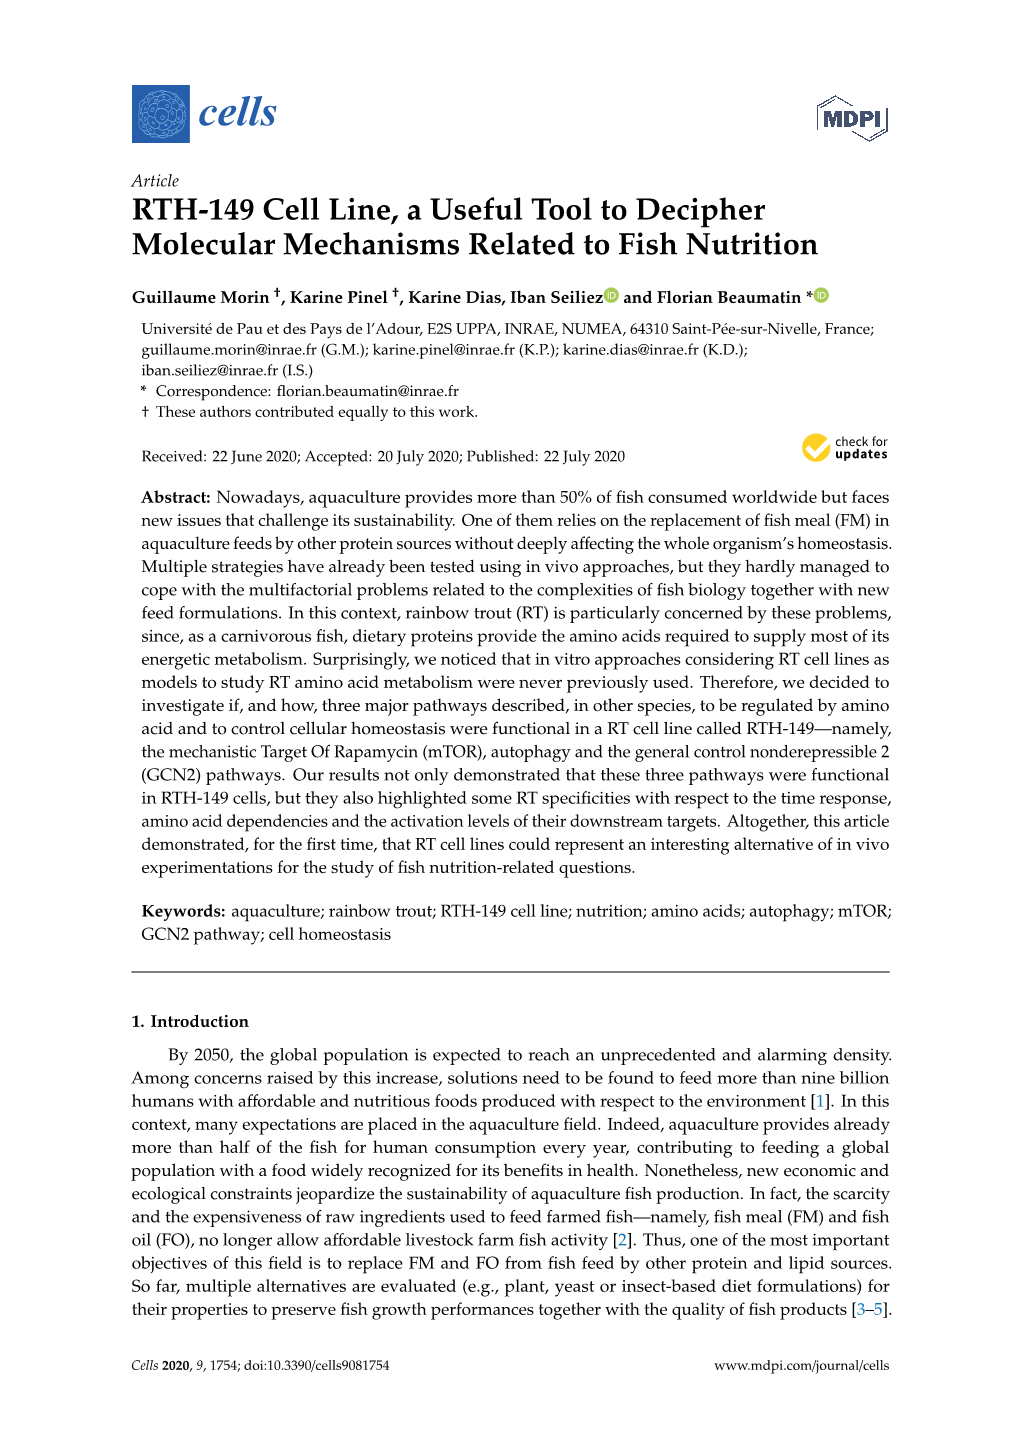 RTH-149 Cell Line, a Useful Tool to Decipher Molecular Mechanisms Related to Fish Nutrition